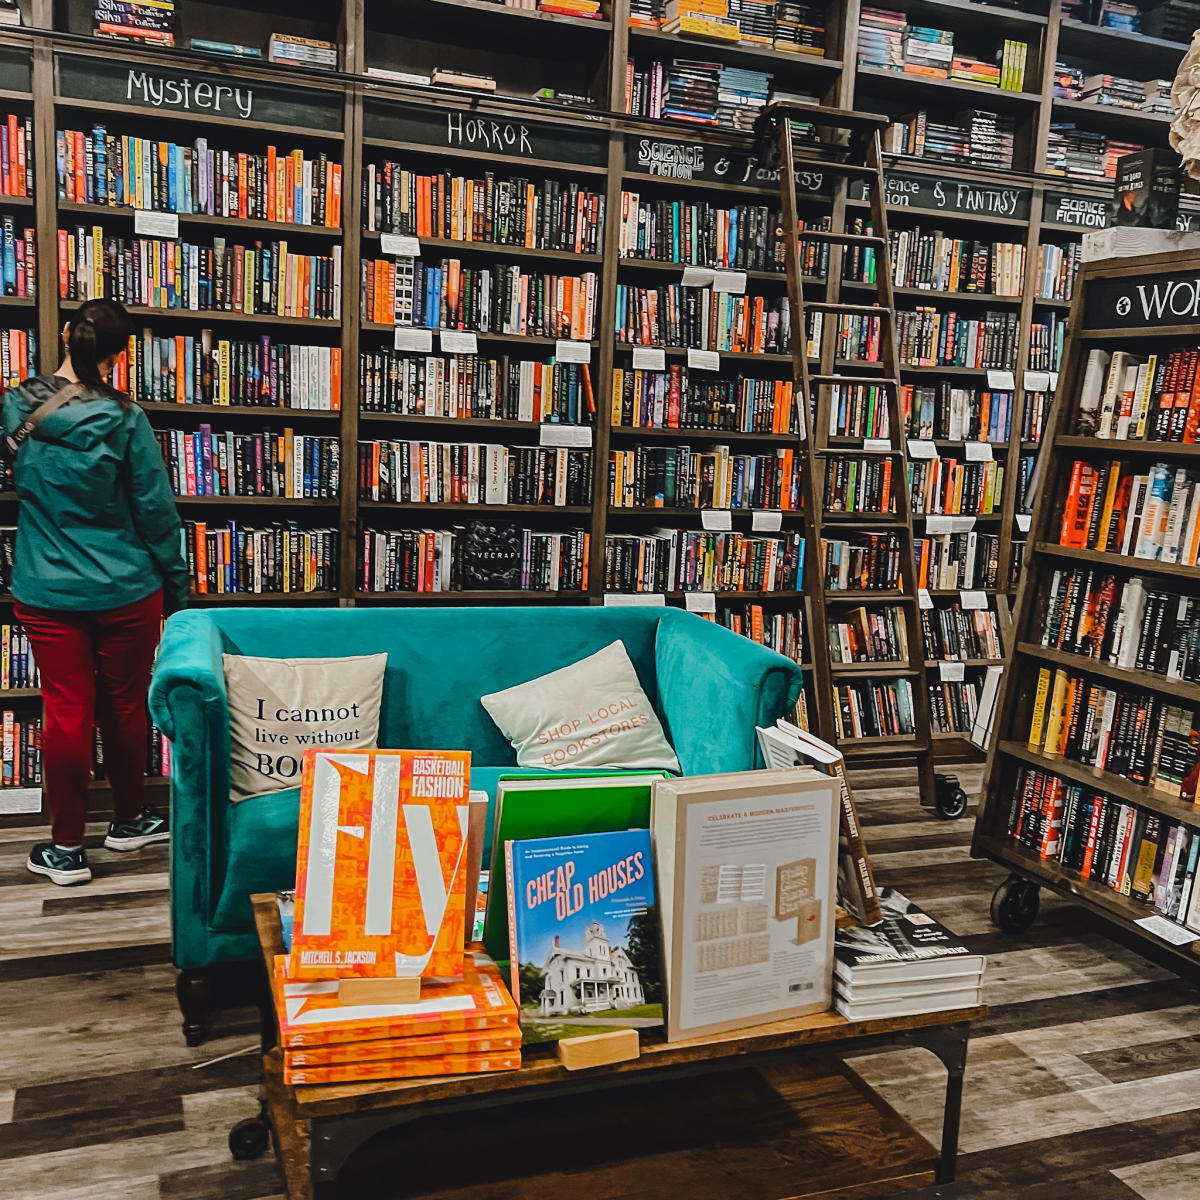 This is a Bookstore